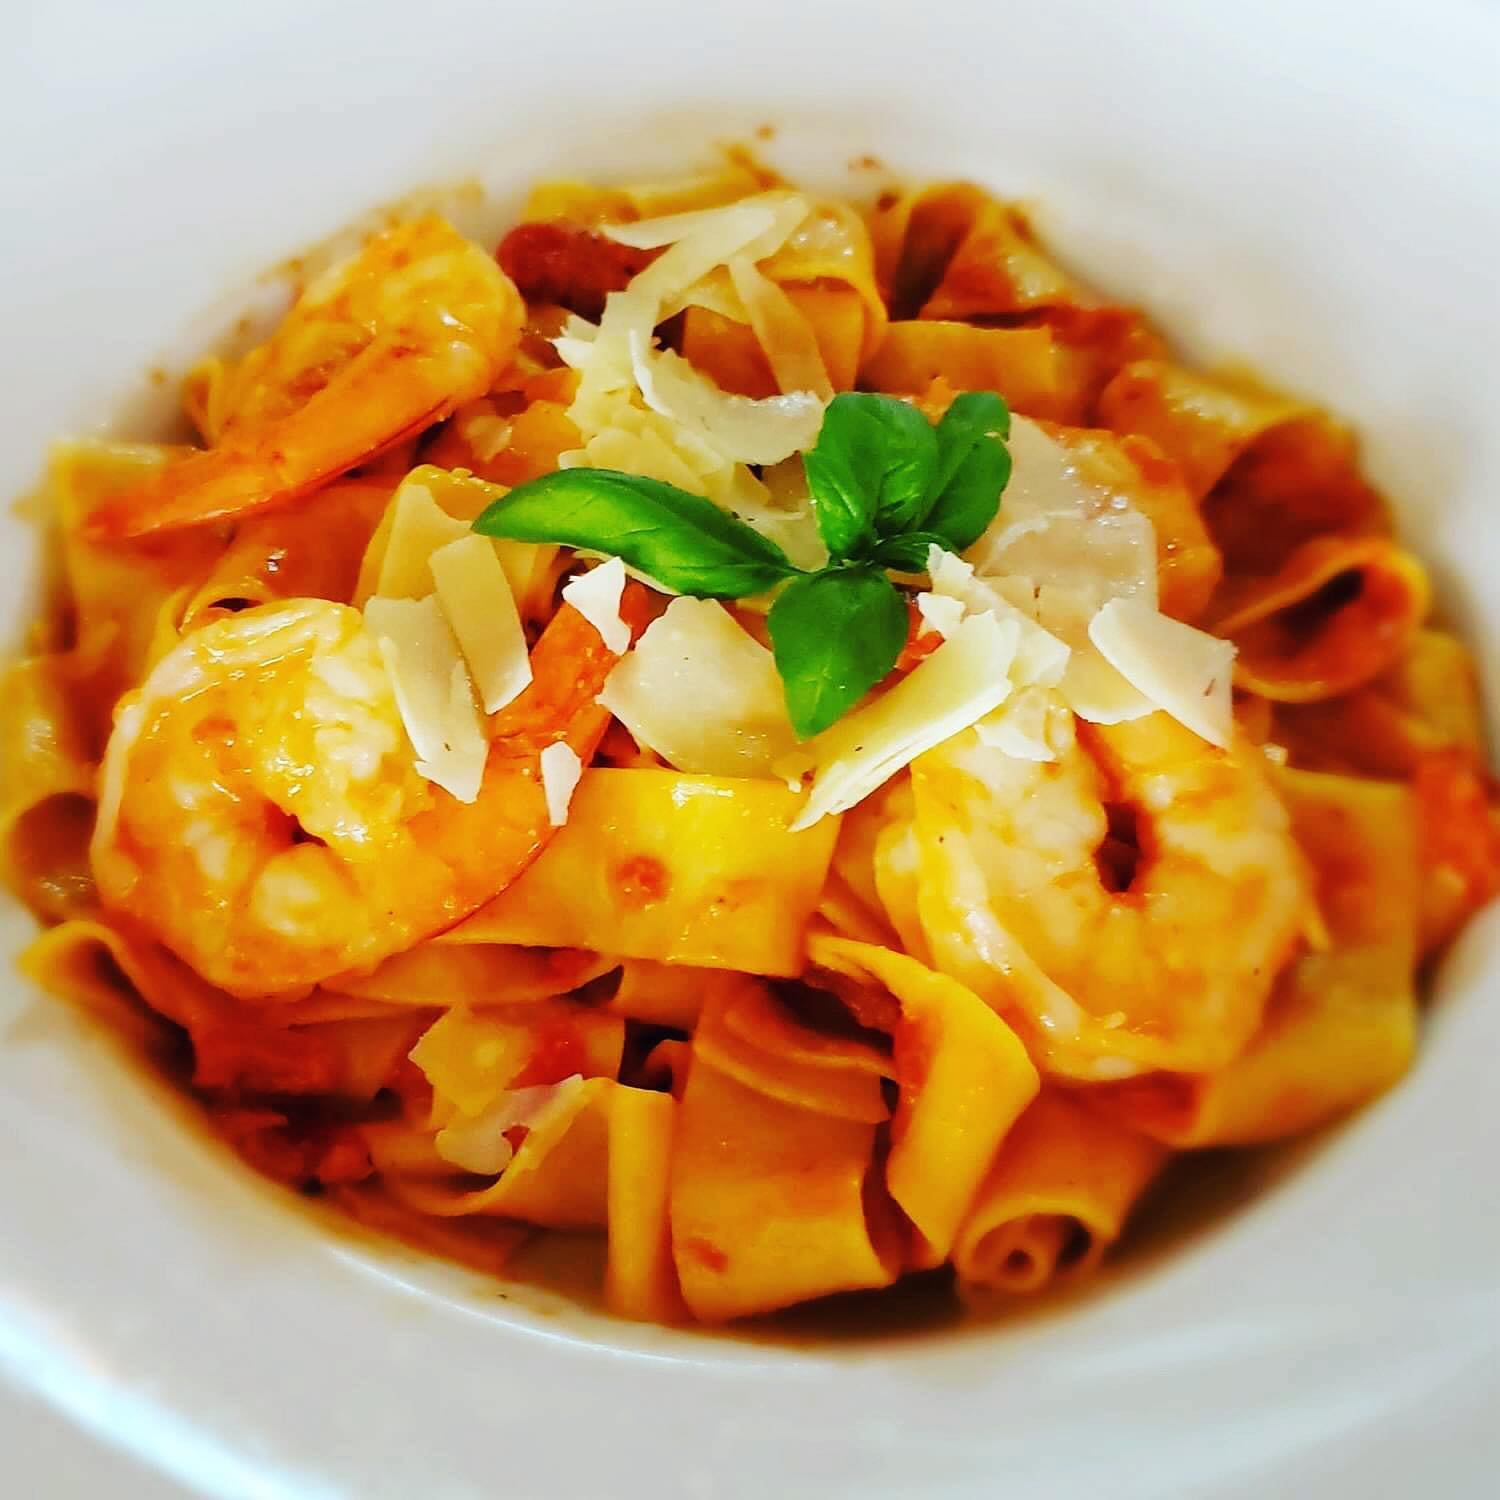 Come indulge in our popular Shrimp Pappardelle entree. Jumbo Shrimp, Wide Noodle Pappardelle Pasta, House-made Tomato Basil Cream Sauce.